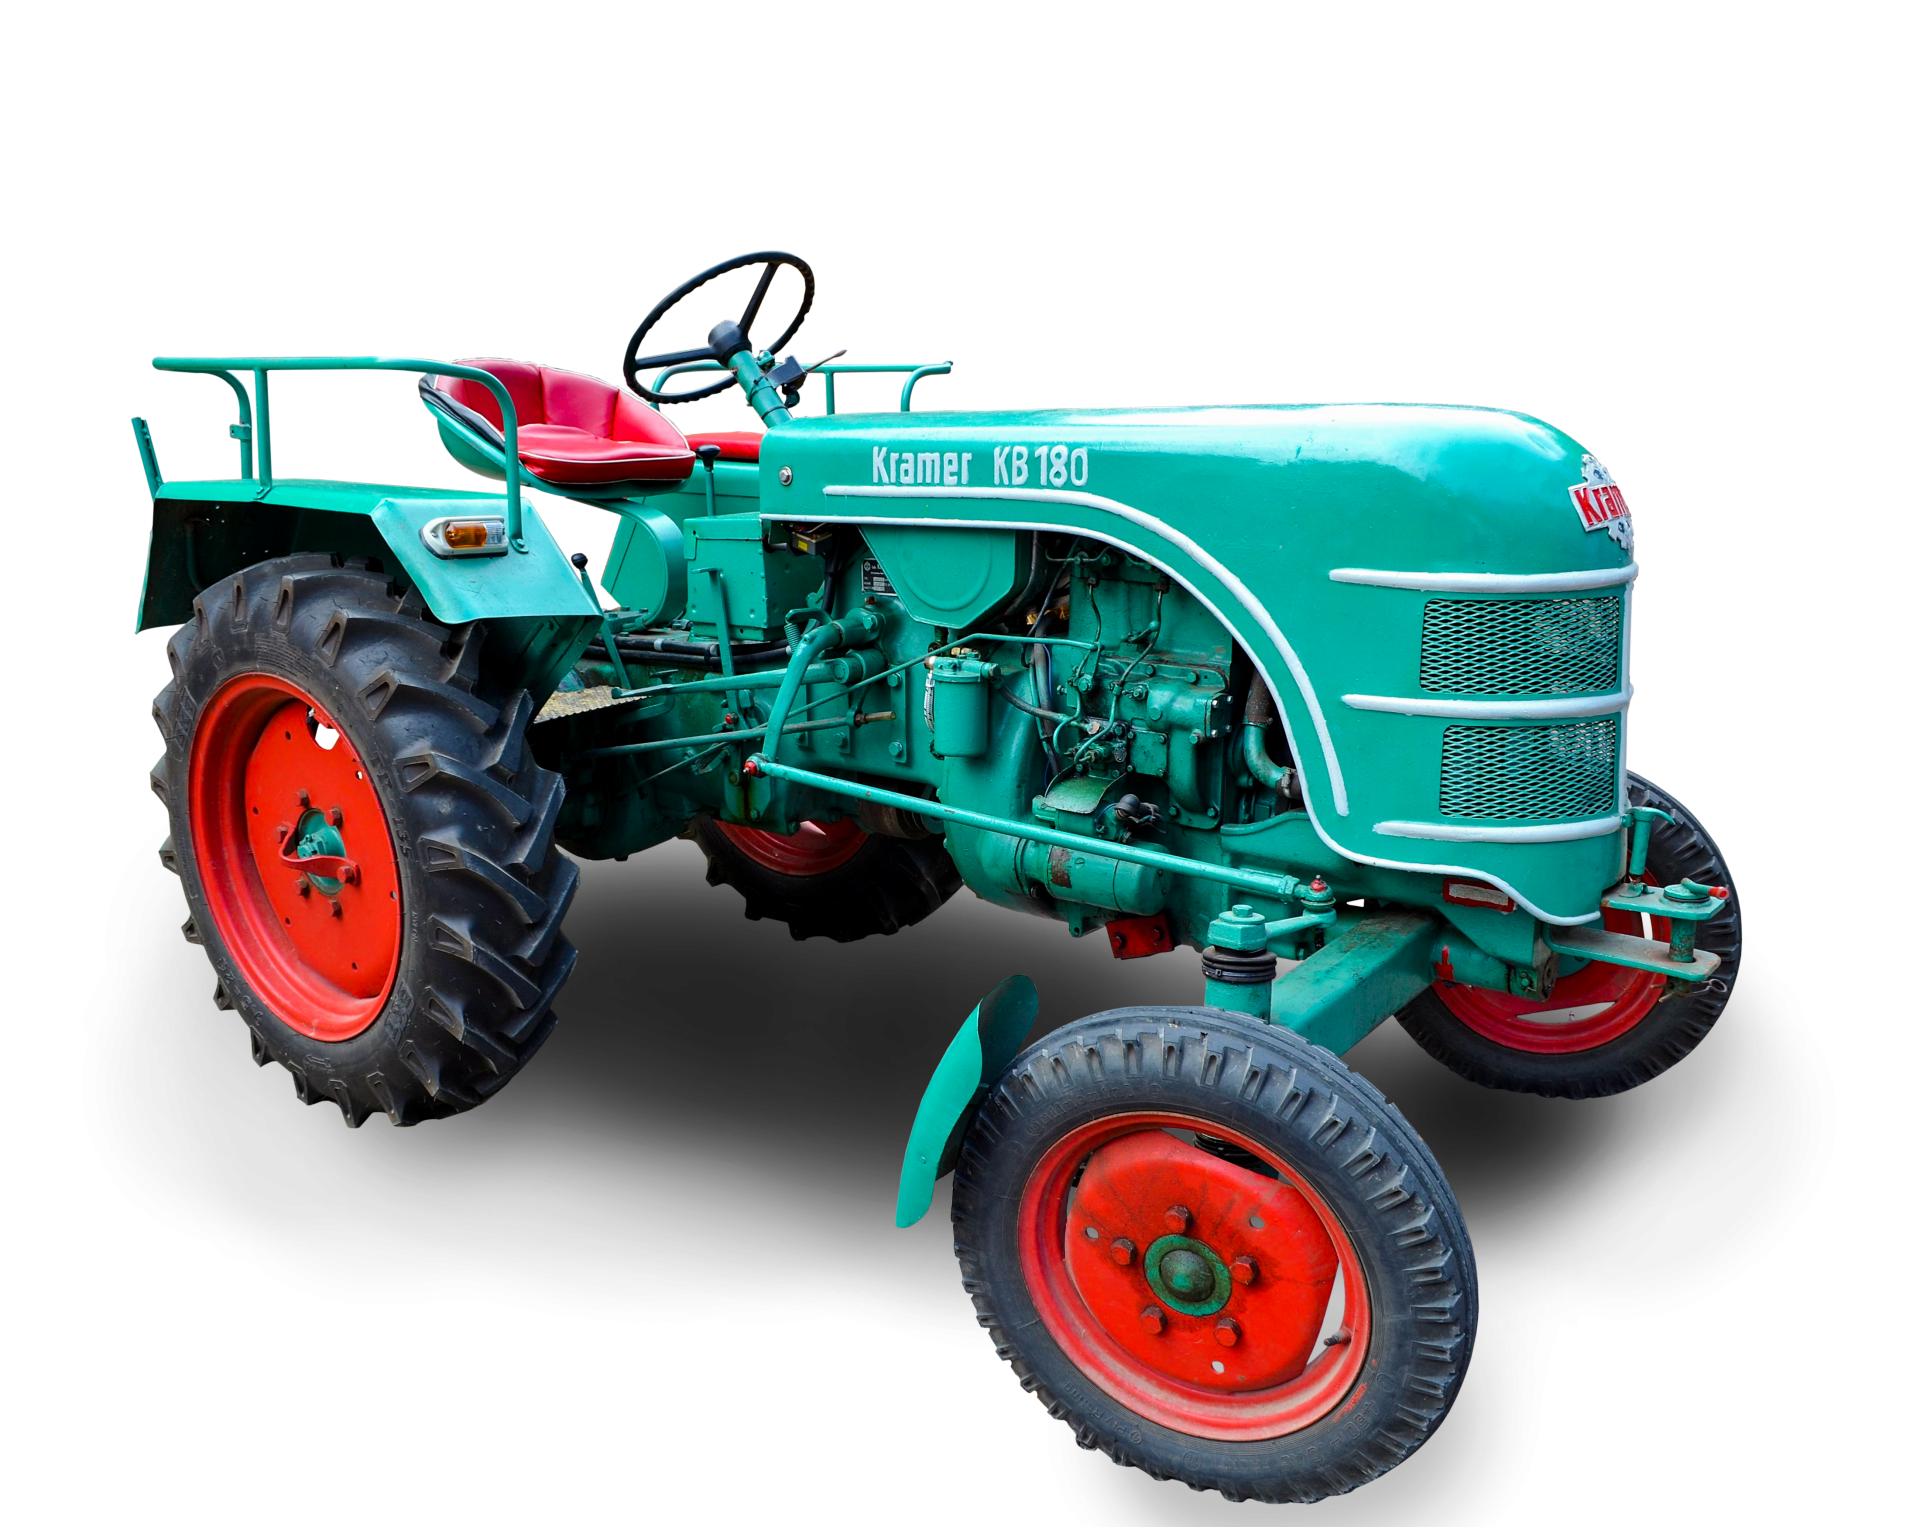 A green old tractor of the brand Kramer KB 180, oldtimer, German tractor, agricultural tractor